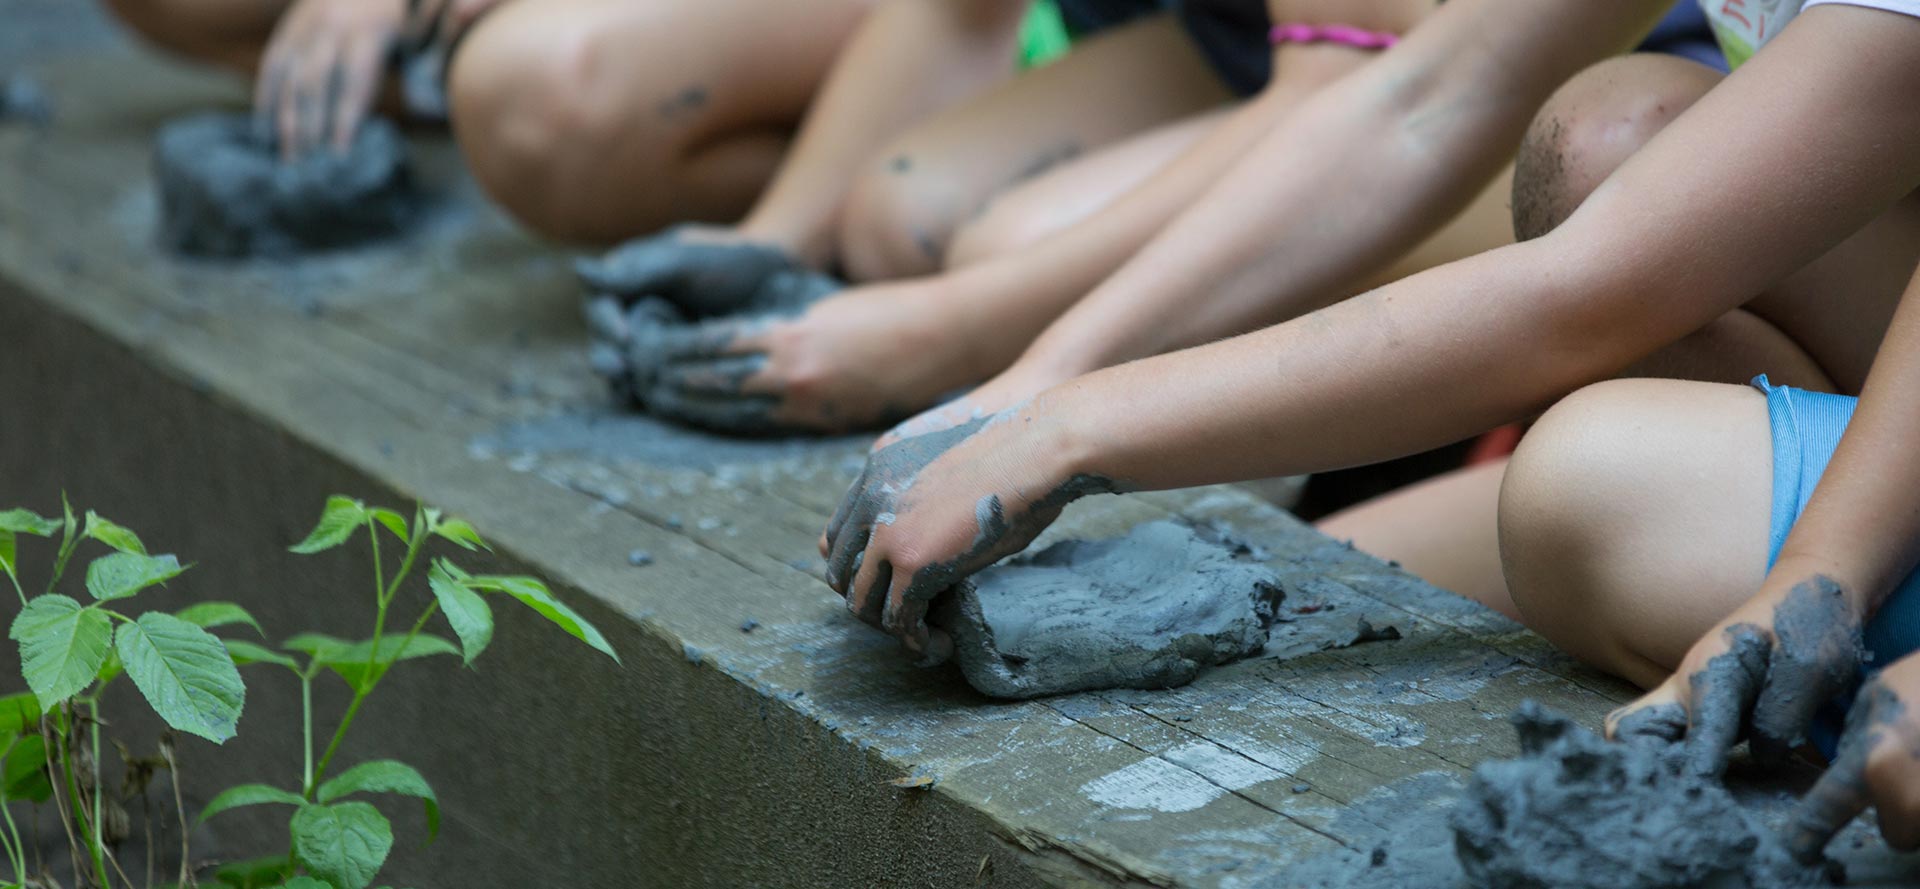 Detail image of hands of children shaping clay from the estuary.